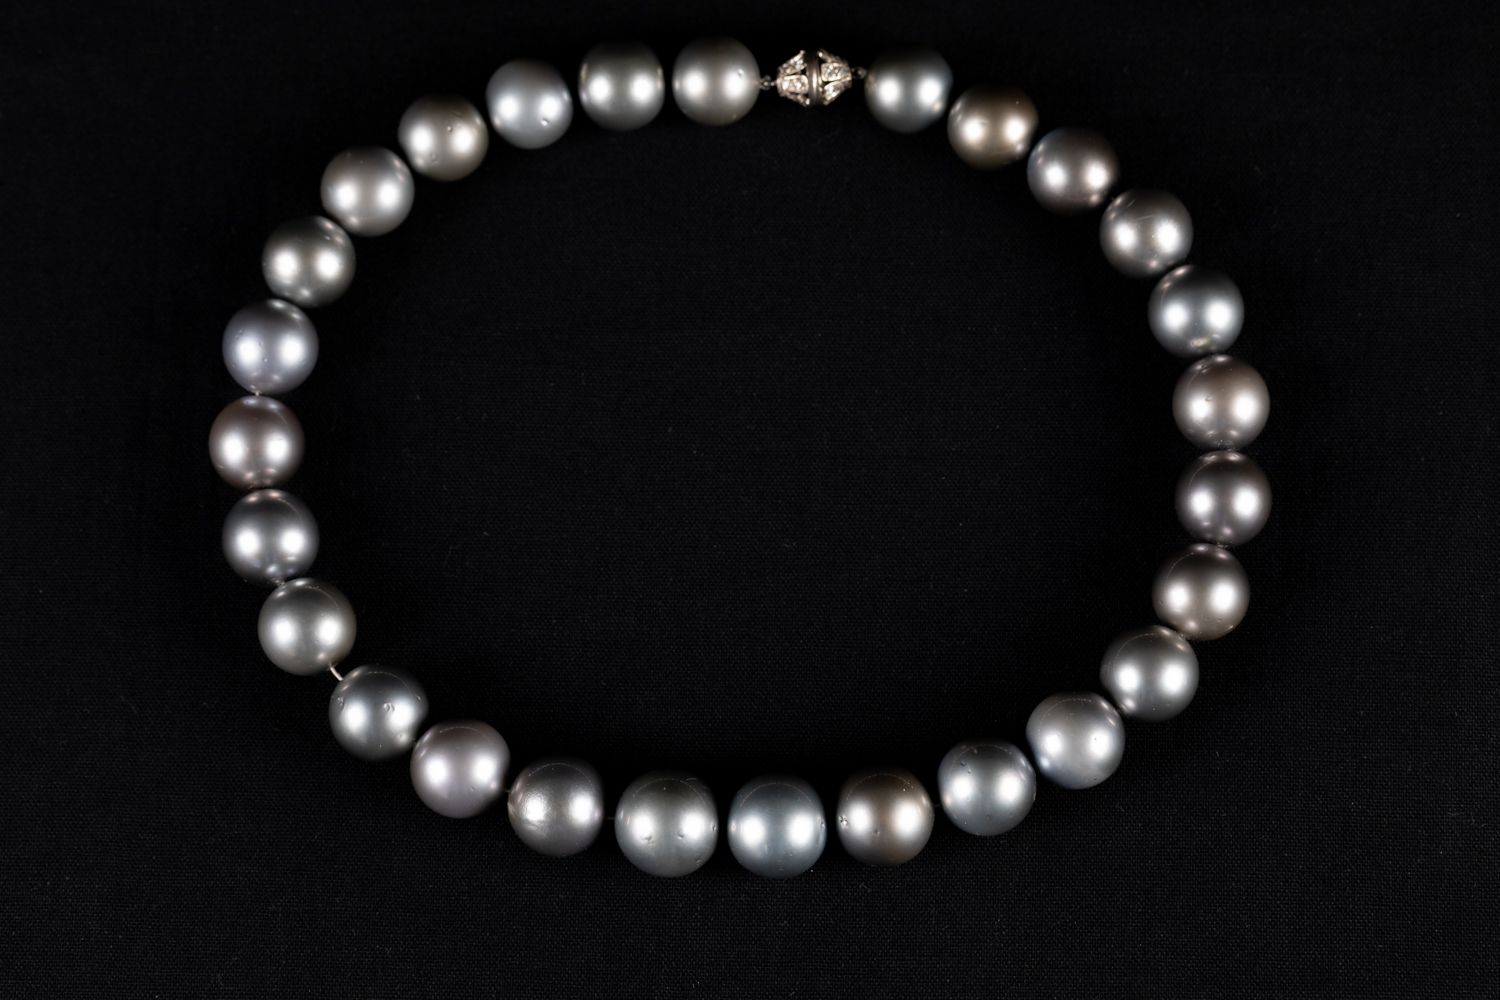 Null Pearl Necklace with Tahiti pearls, 15-18mm.